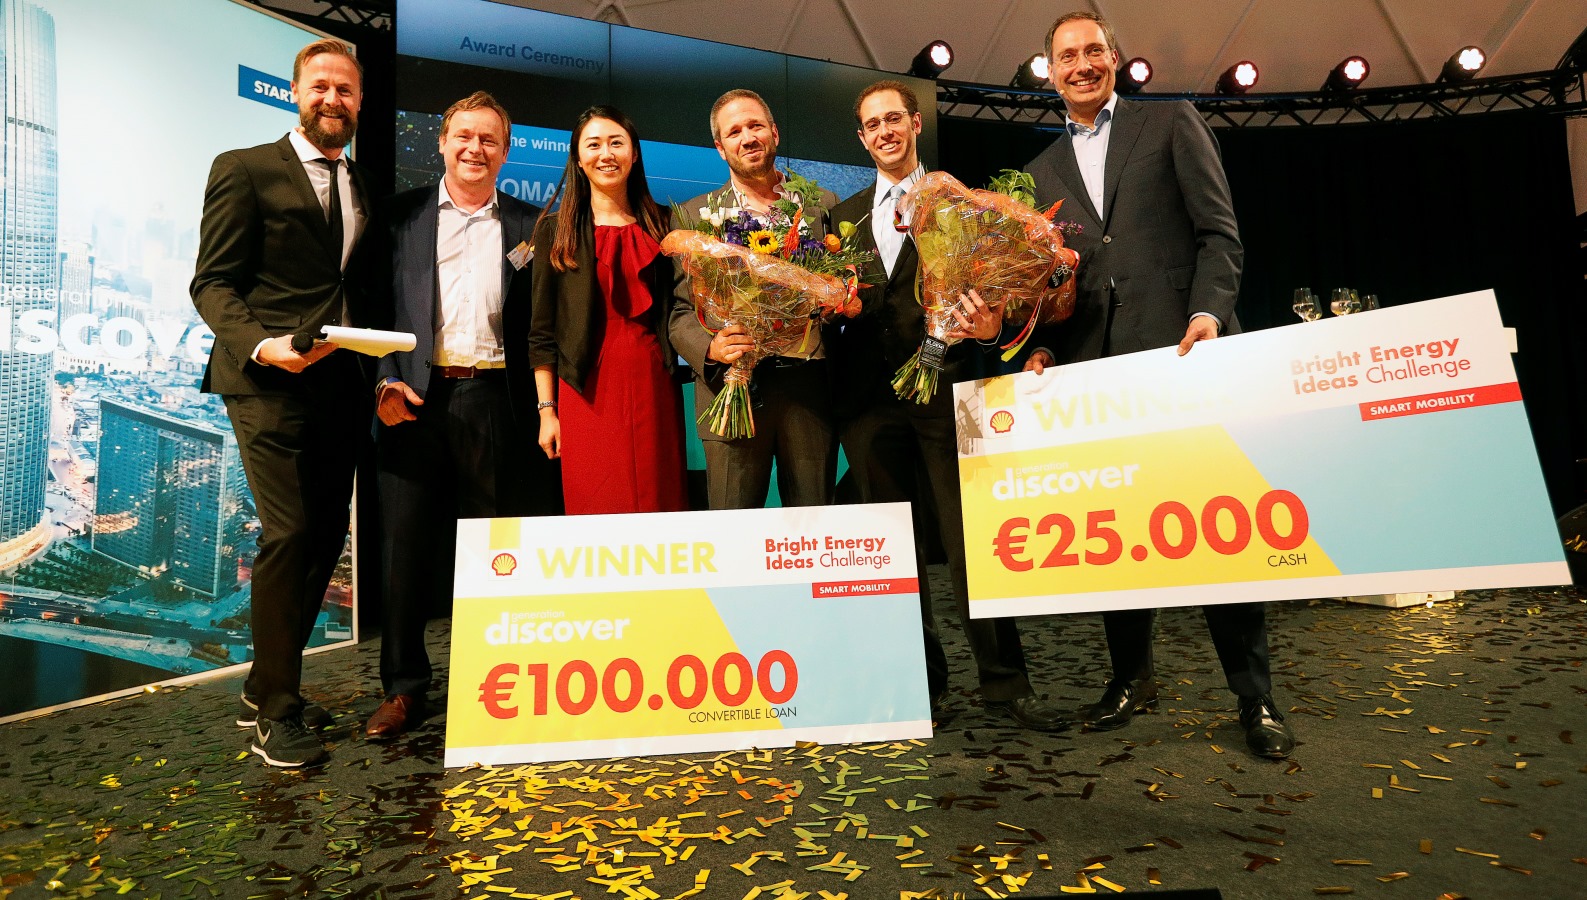 Geert van der Wouw, managing director of Shell Technology Ventures, second from left, with Shell and Neomatix executives at the awarding of first prize to Neomatix in the Shell Bright Energy Ideas Challenge in The Netherlands. Photo by Jiri Buller/AP images for Shell